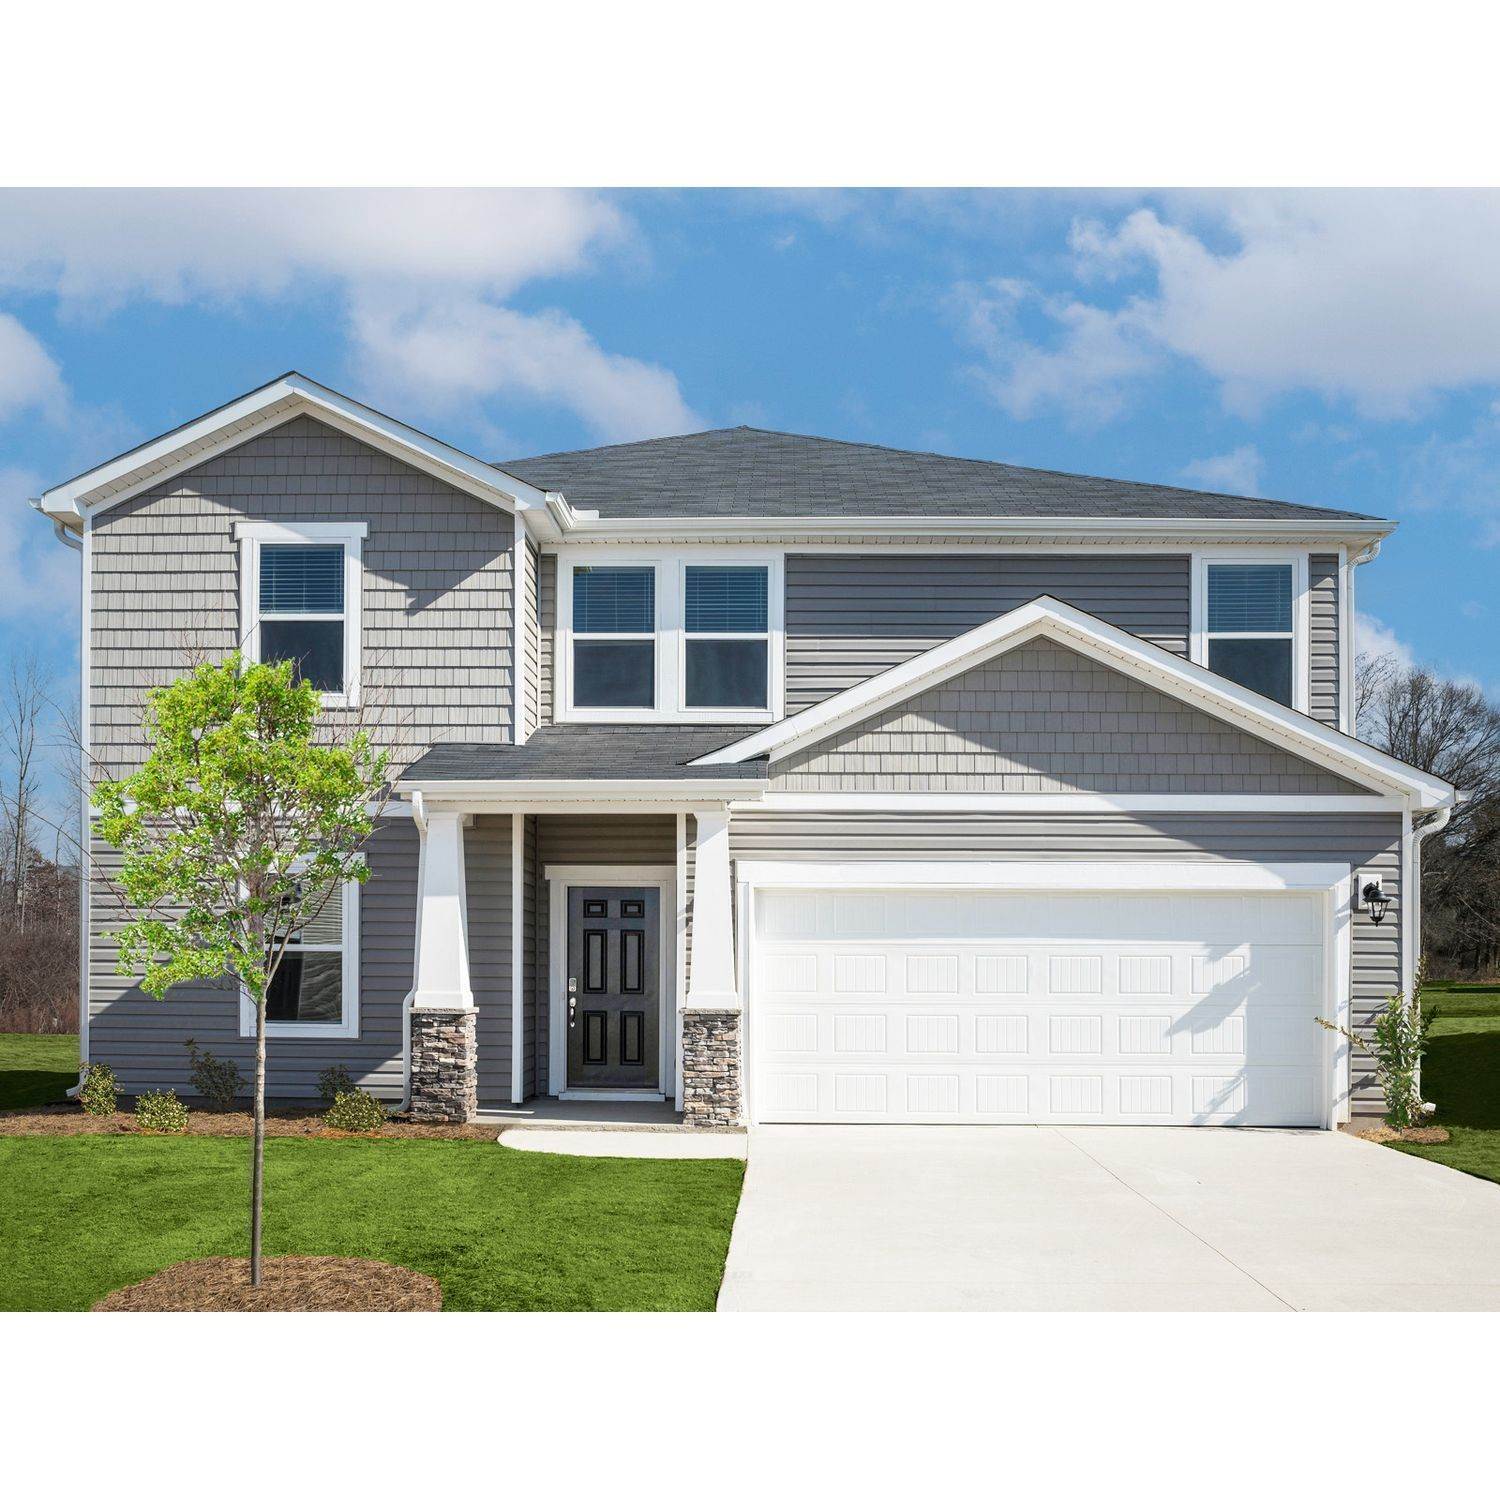 Single Family for Sale at Simpsonville, SC 29680